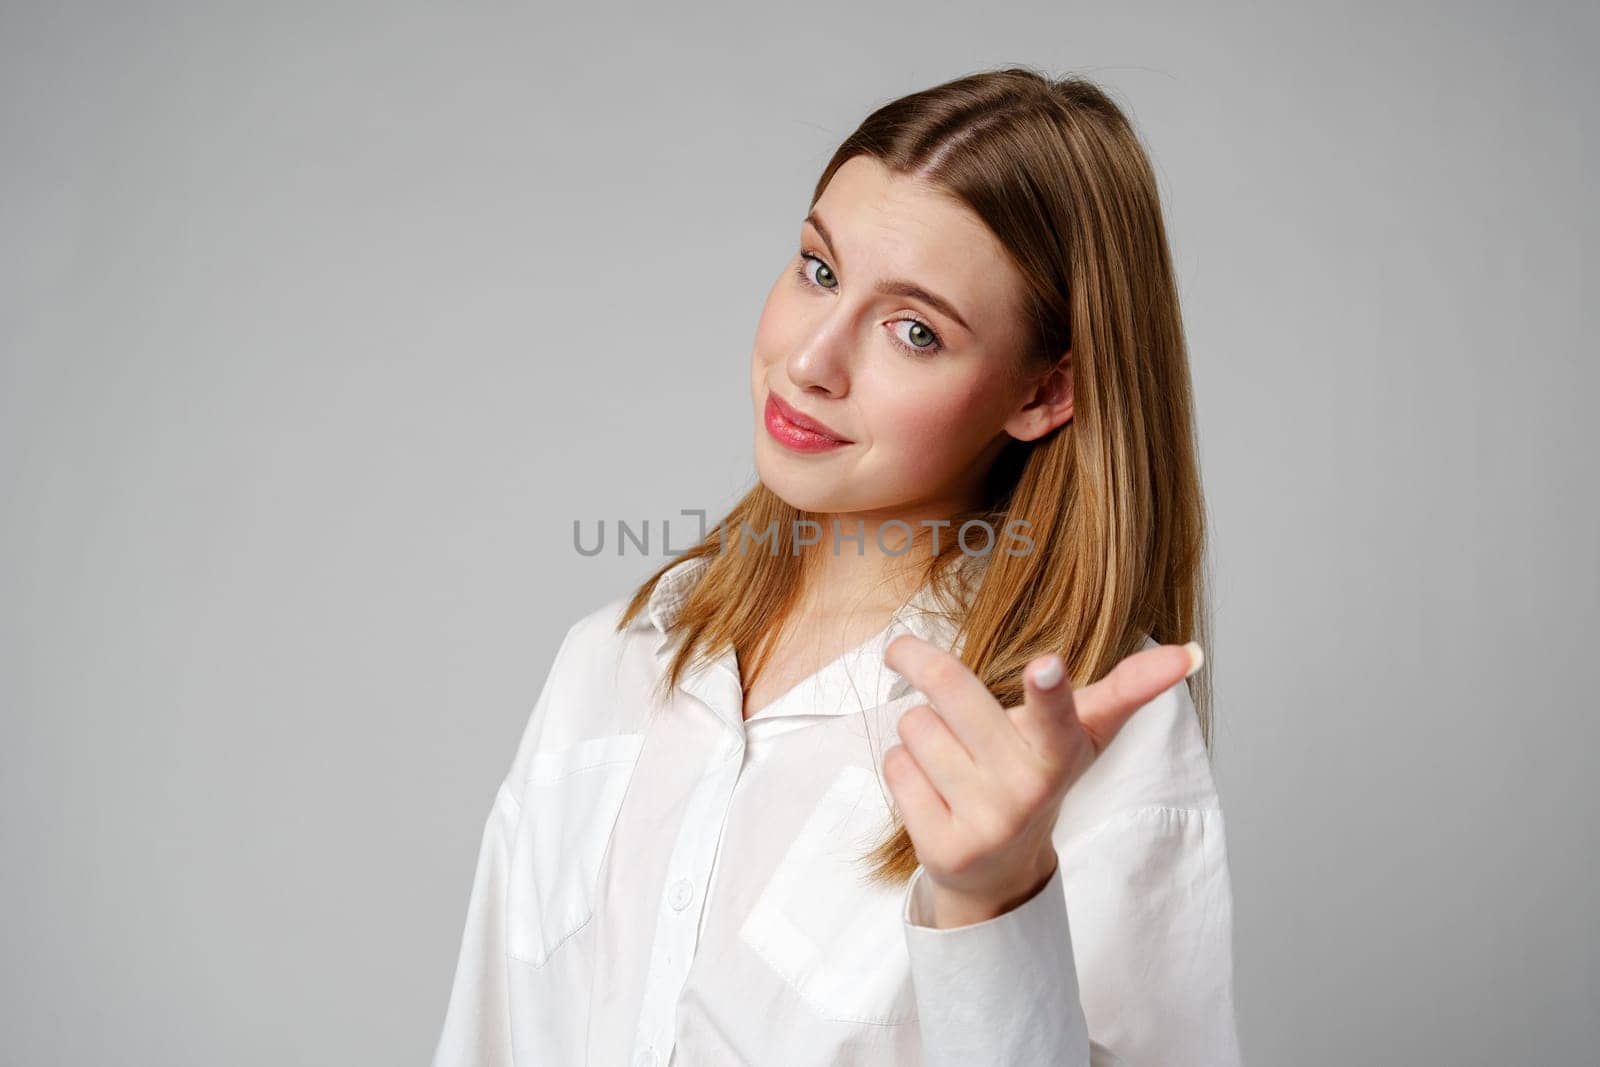 Young Woman in White Shirt Gesturing Come Here With Both Hands Indoors